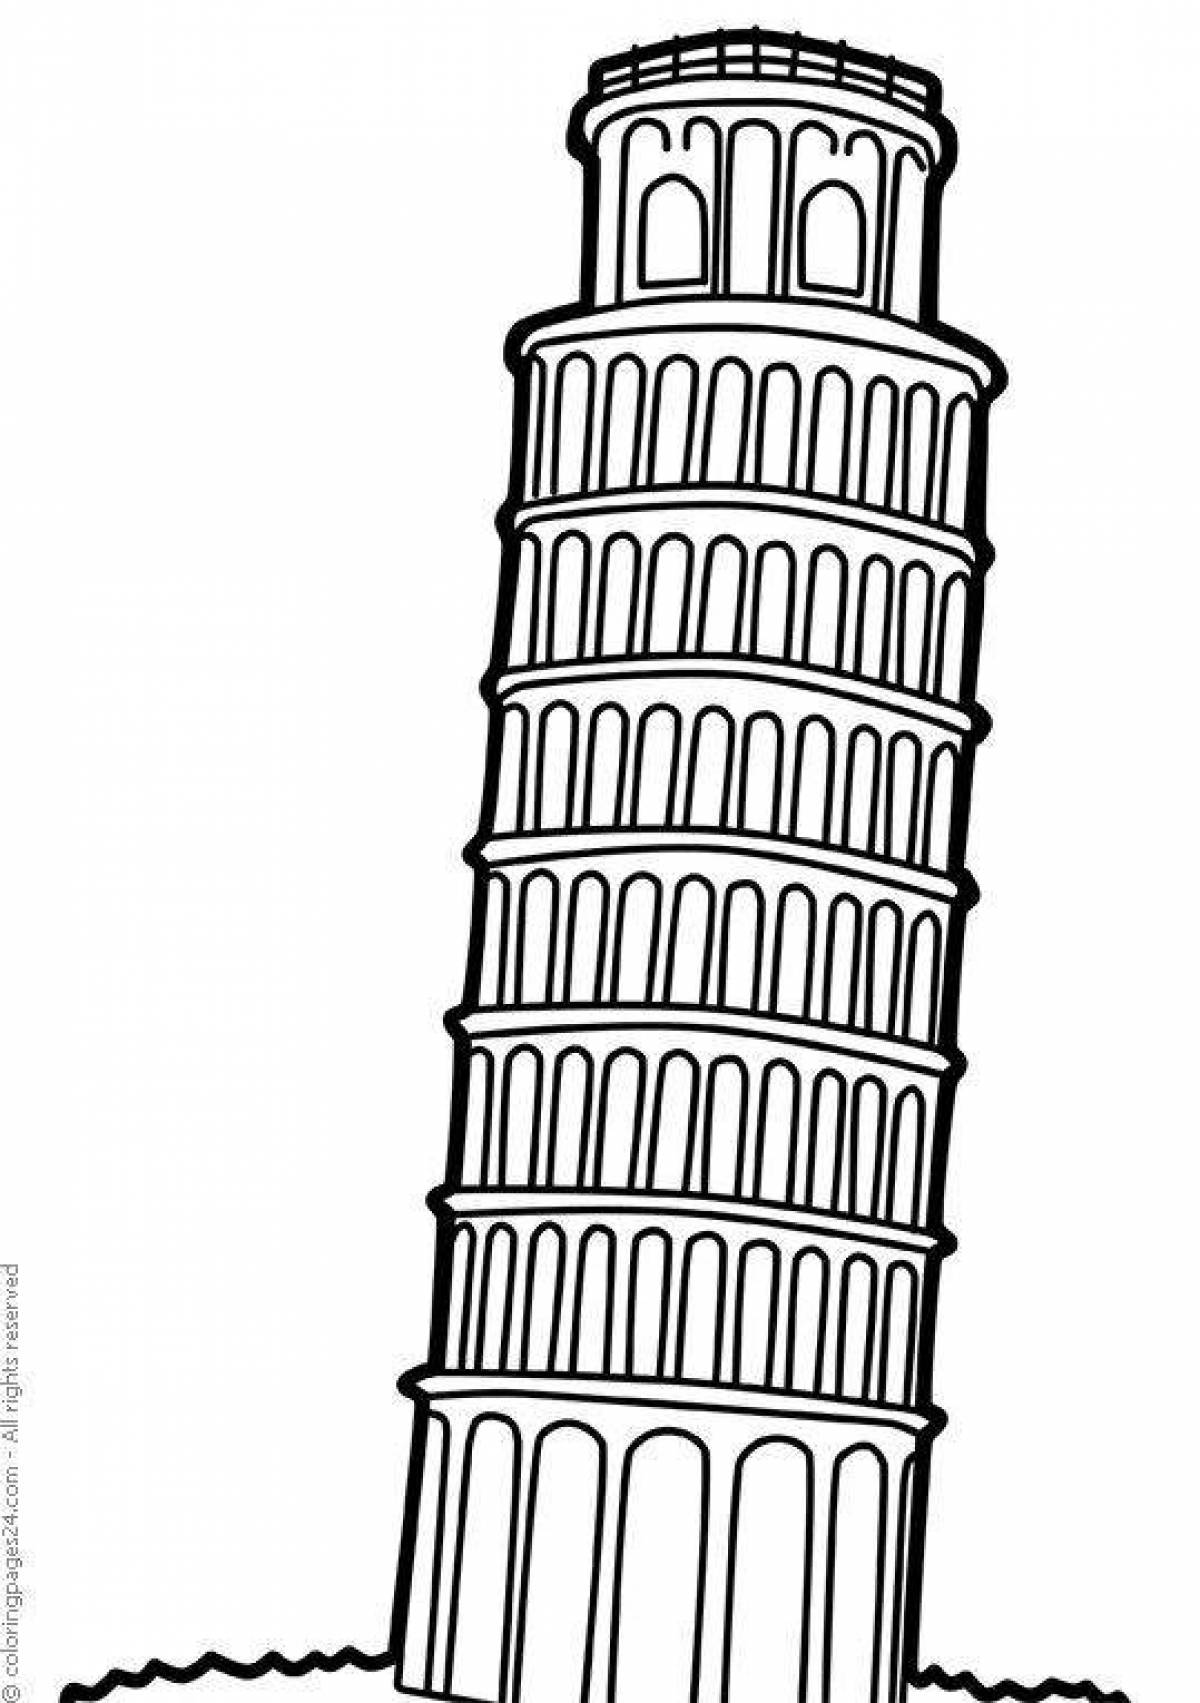 A fascinating coloring of the Leaning Tower of Pisa